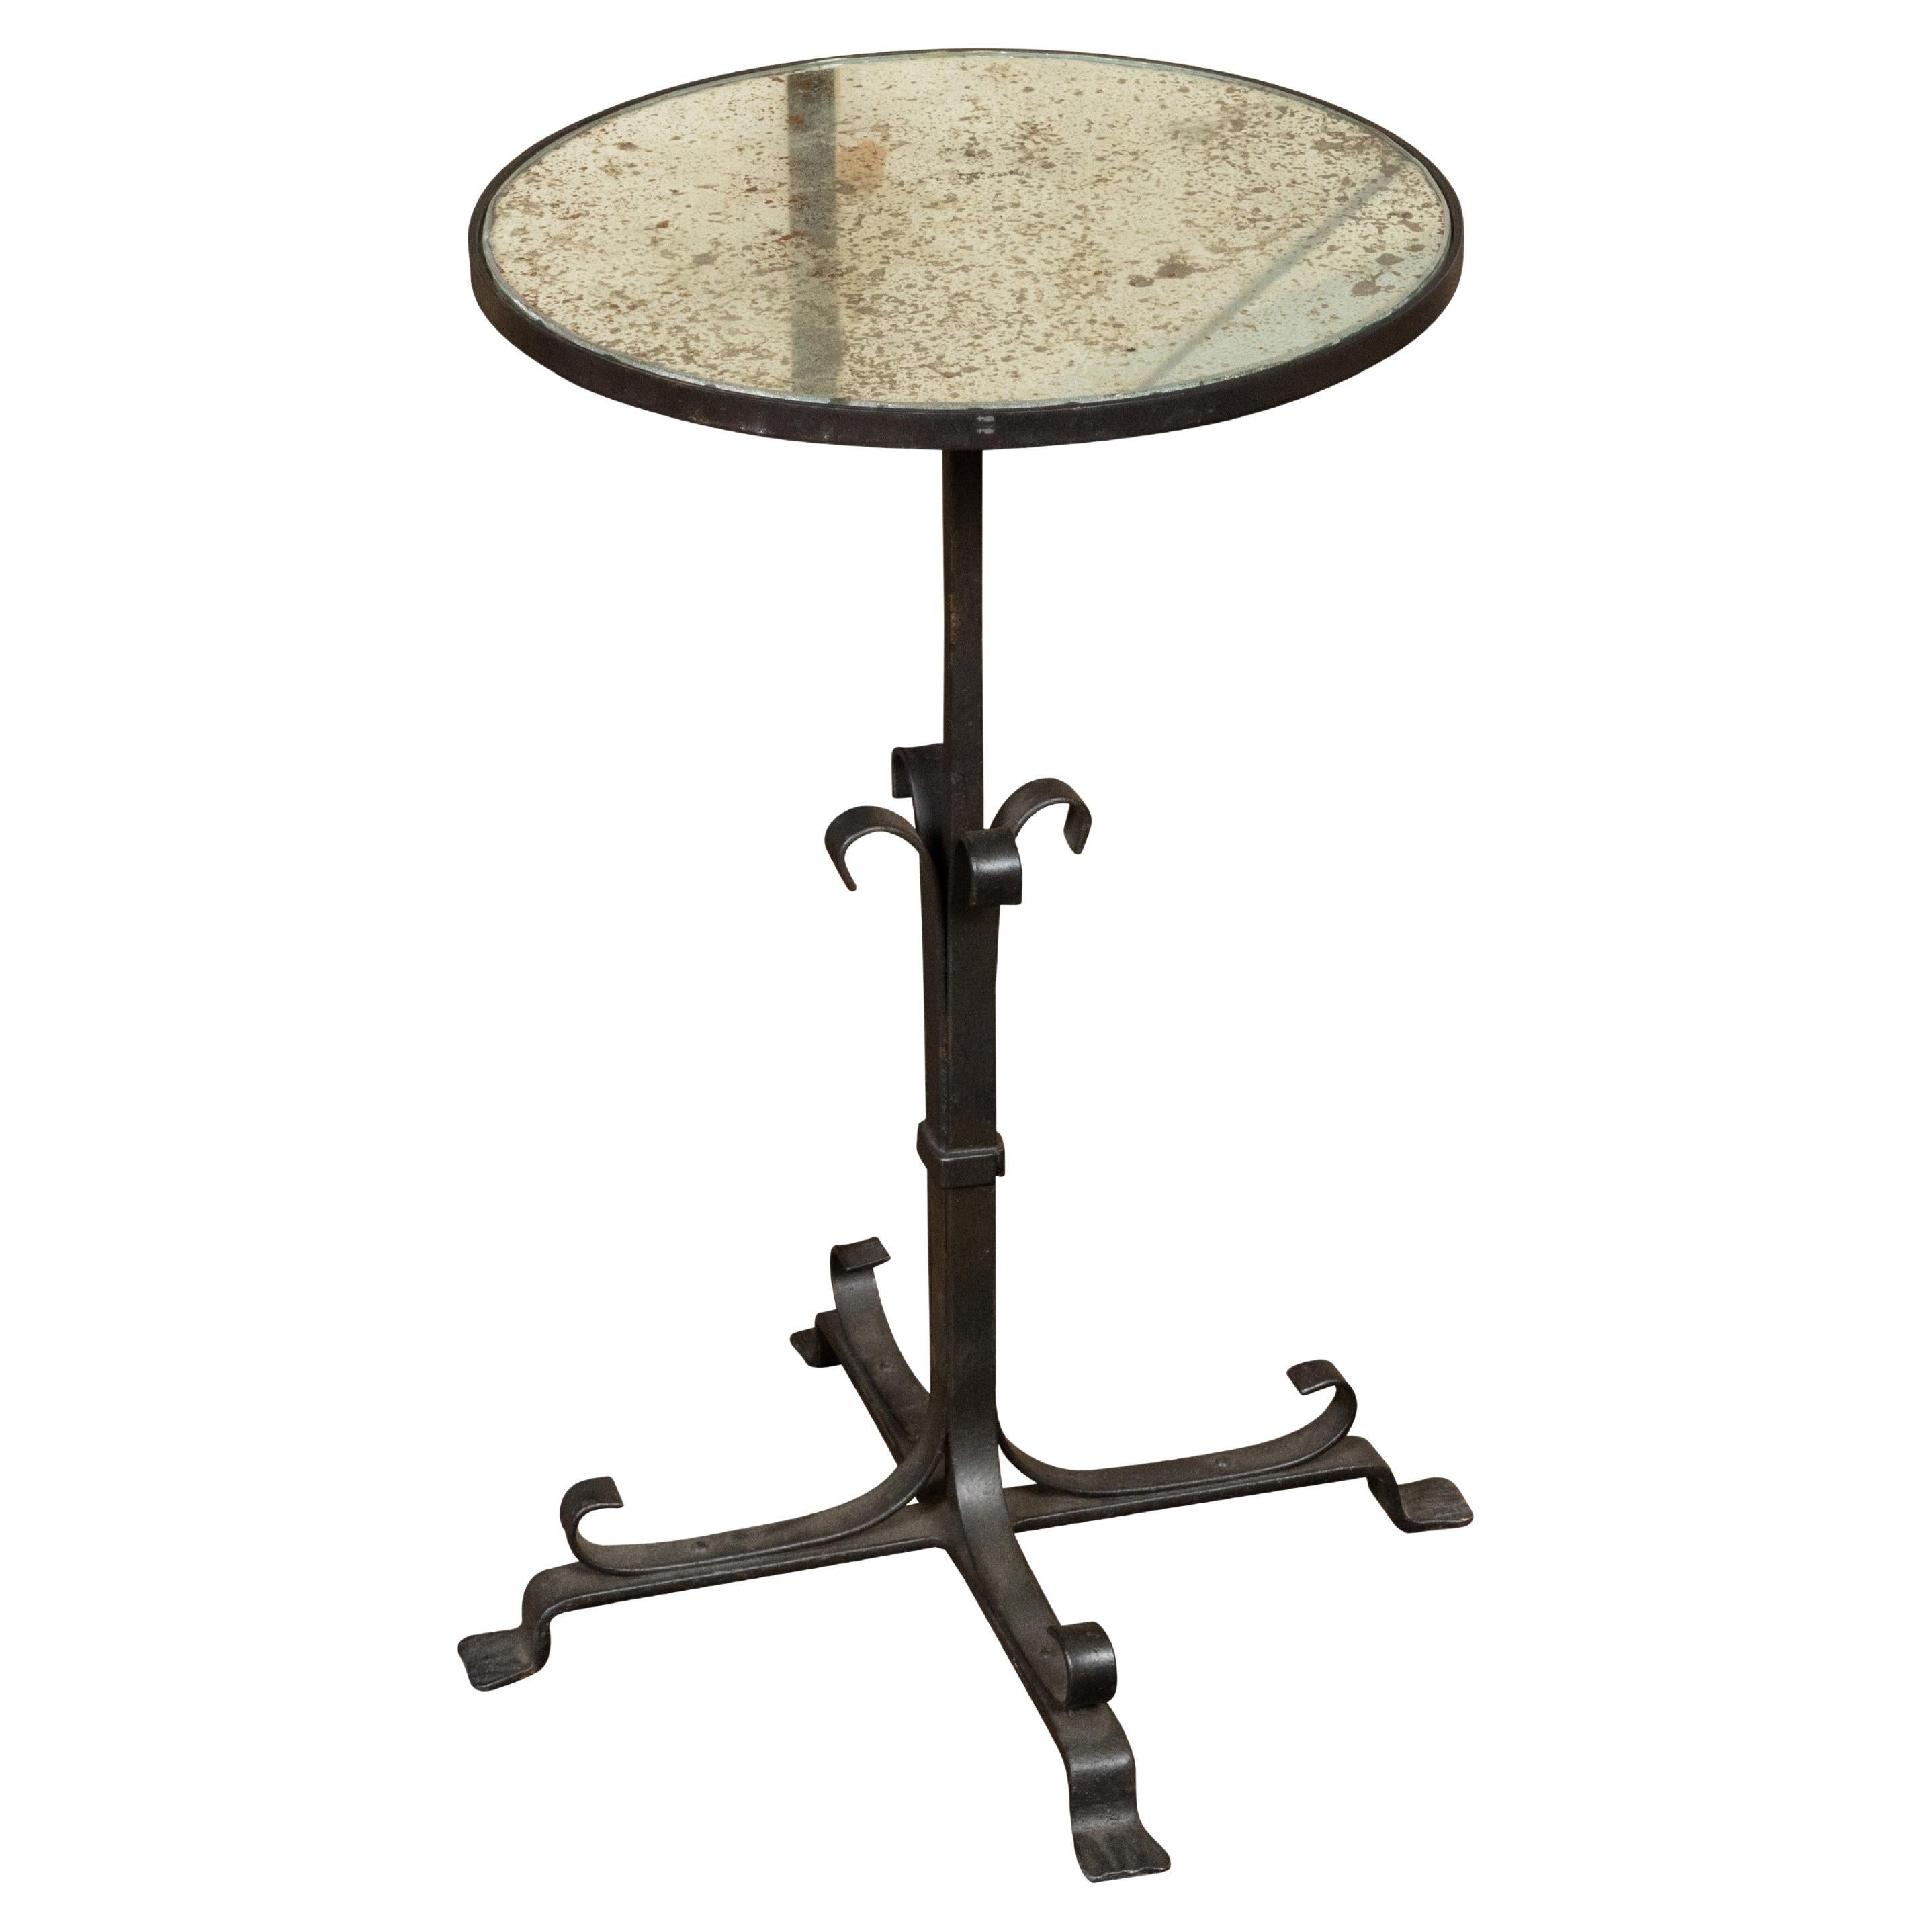 French Midcentury Iron Side Table with Antiqued Mirrored Top and Scrolling Base